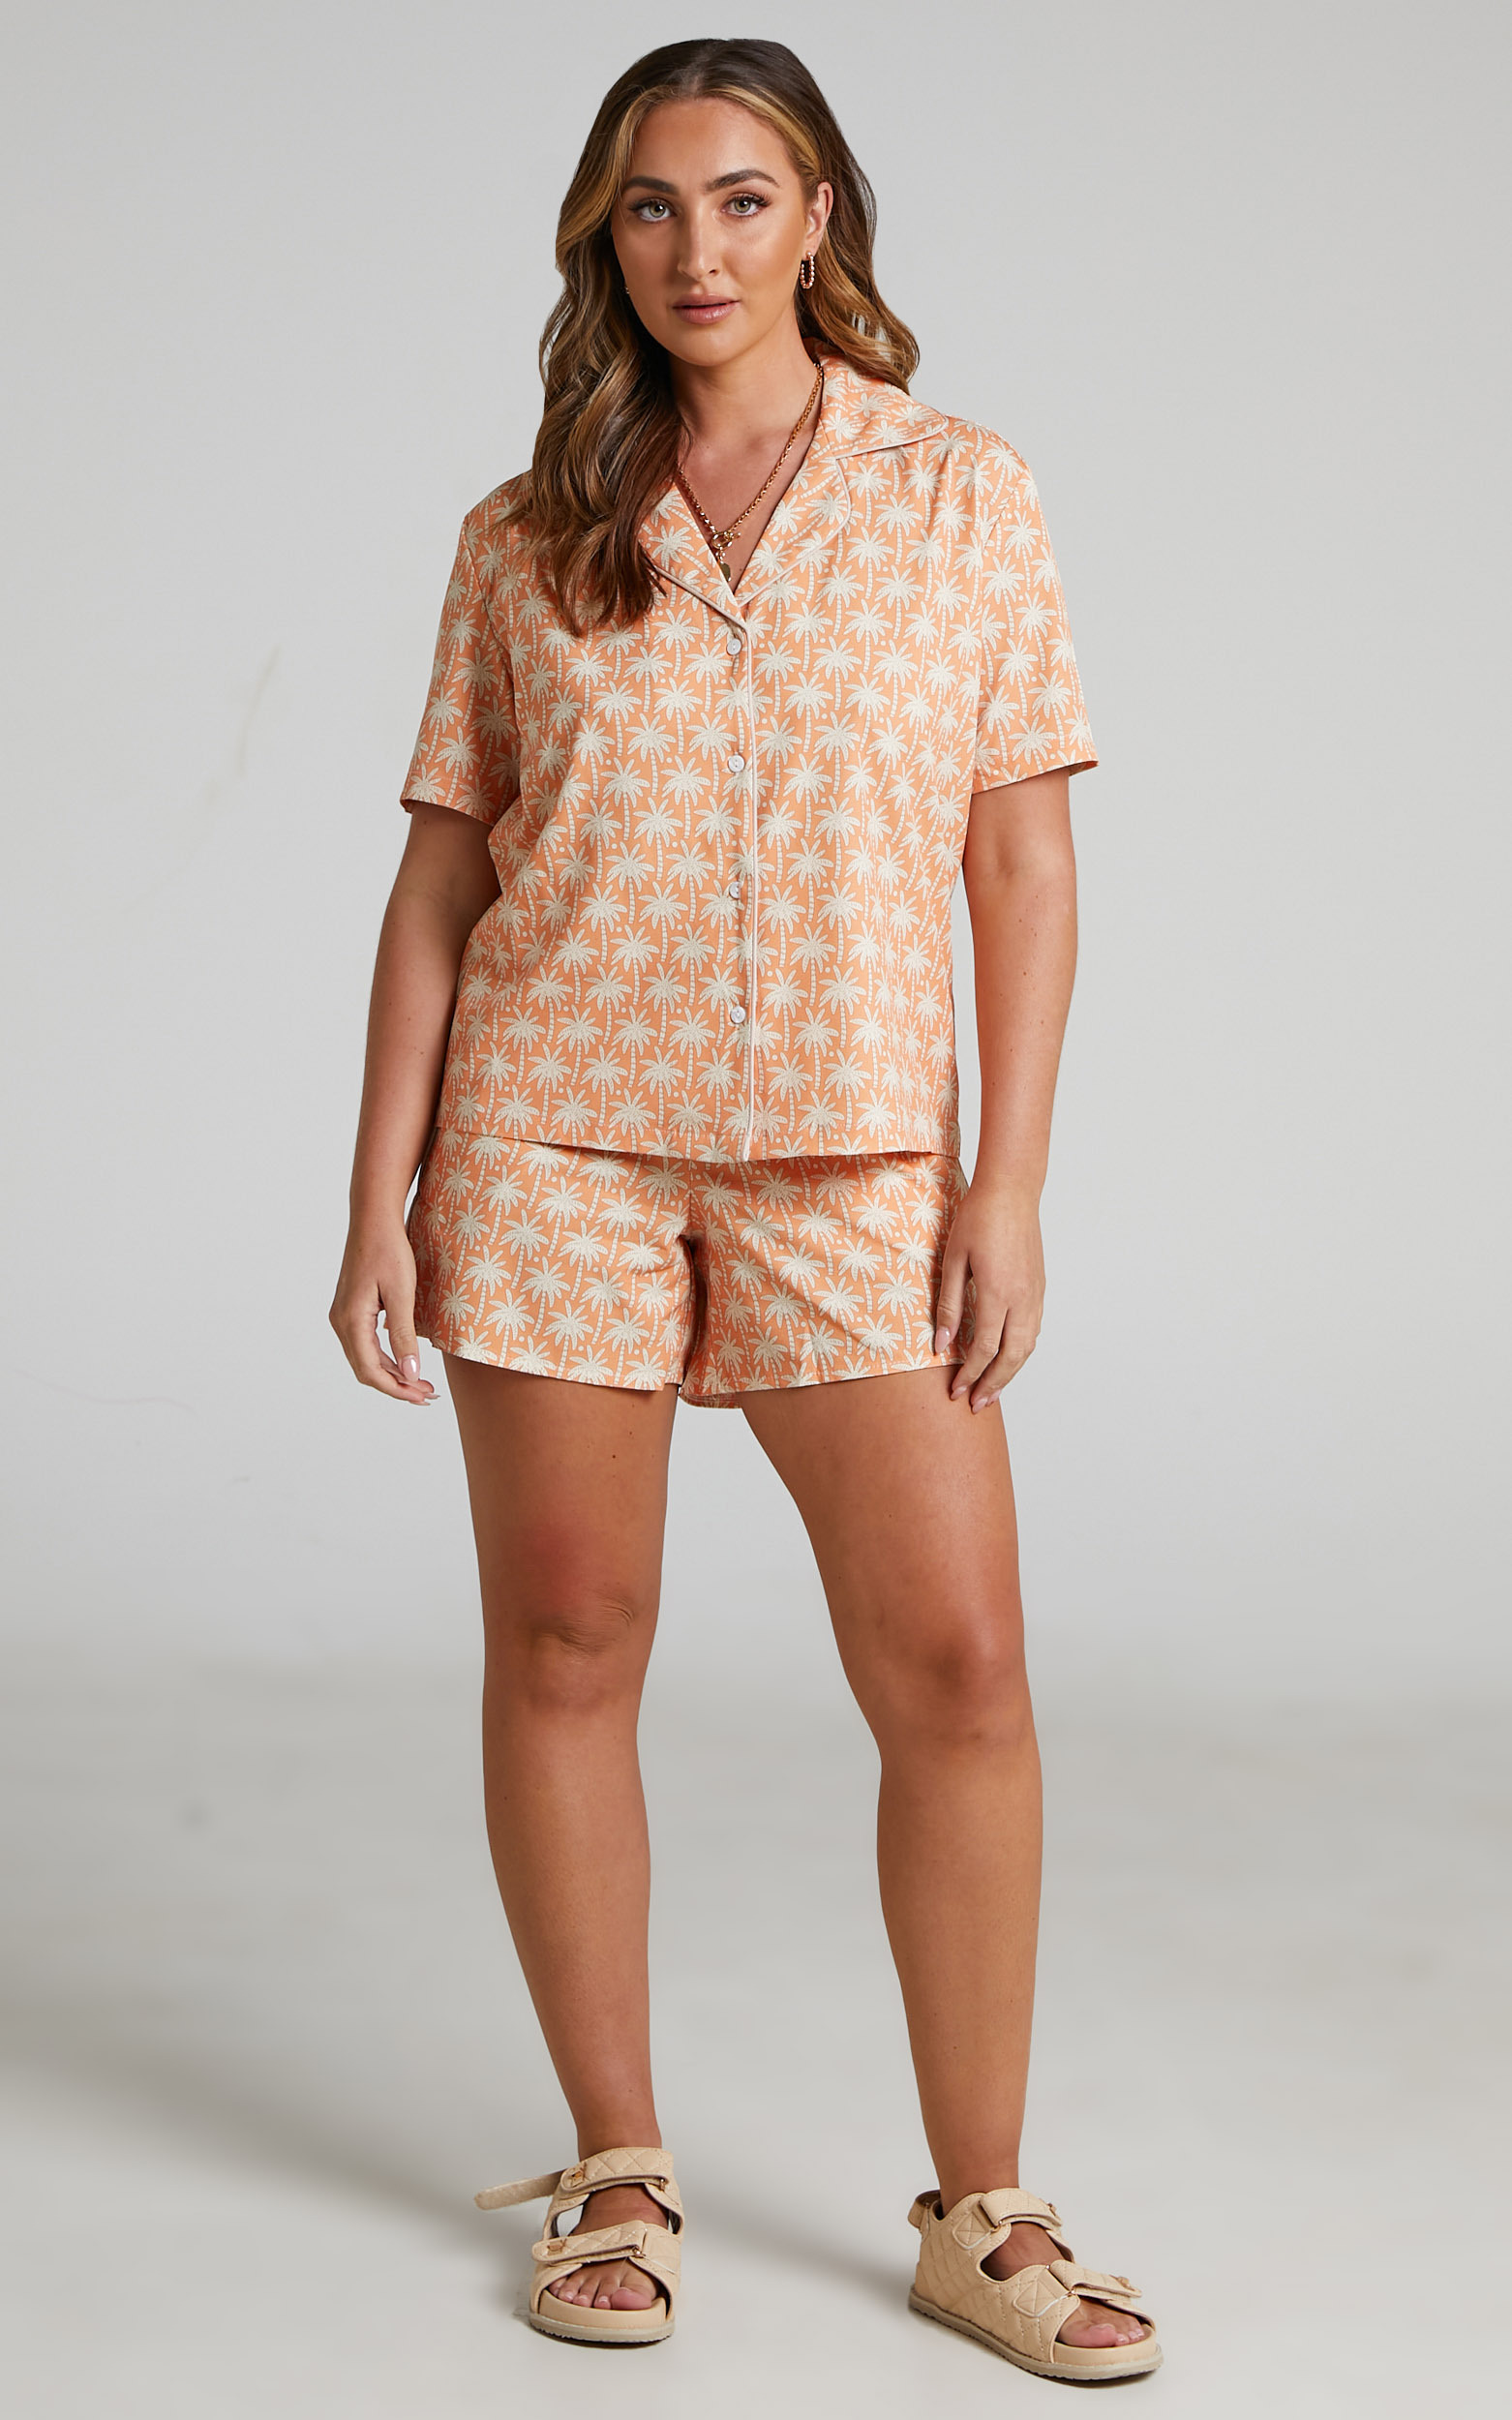 Reegan Collared Shirt and Shorts Two Piece Set in Orange - L, ORG1, hi-res image number null